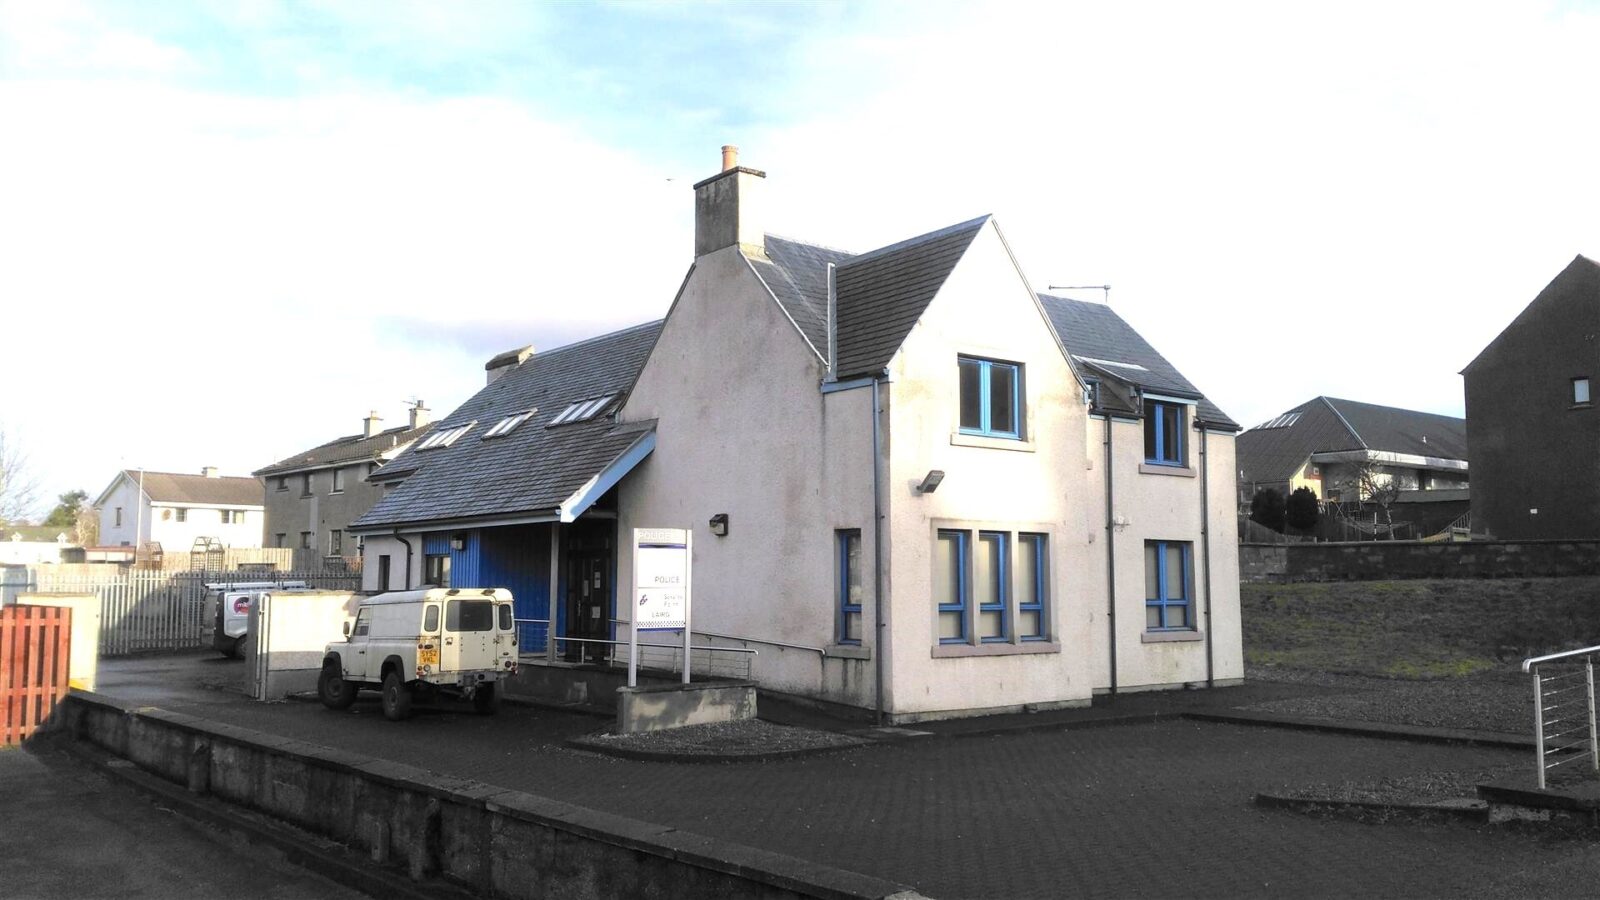 Police Scotland instructs Shepherd to auction former police station in Lairg